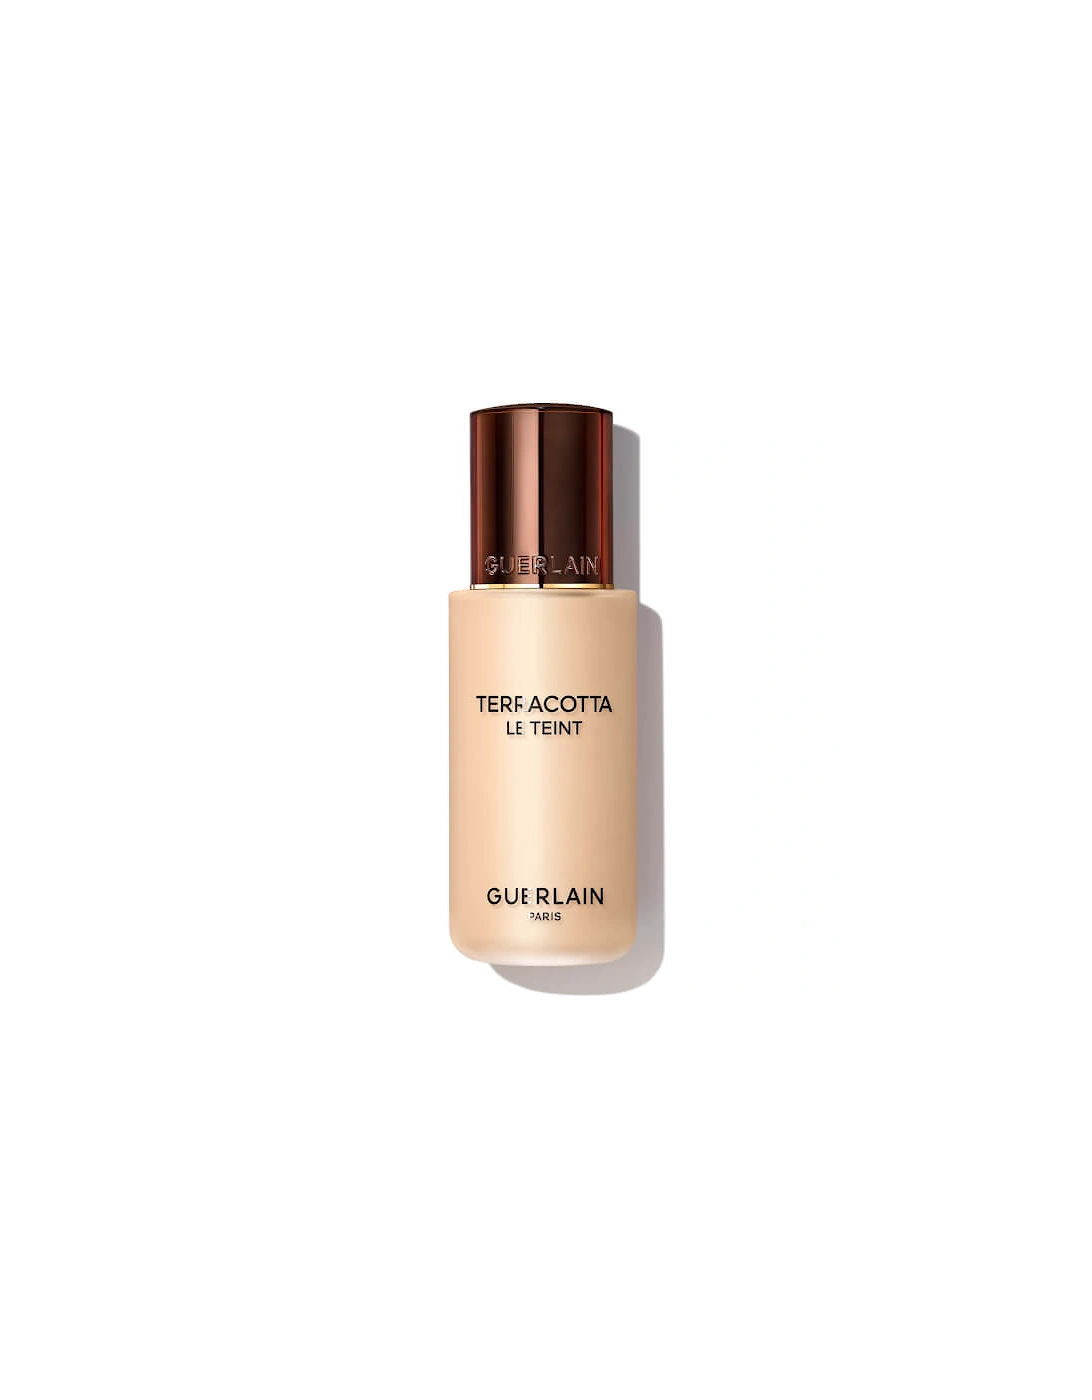 Terracotta Le Teint Healthy Glow Natural Perfection Foundation - 1W, 2 of 1